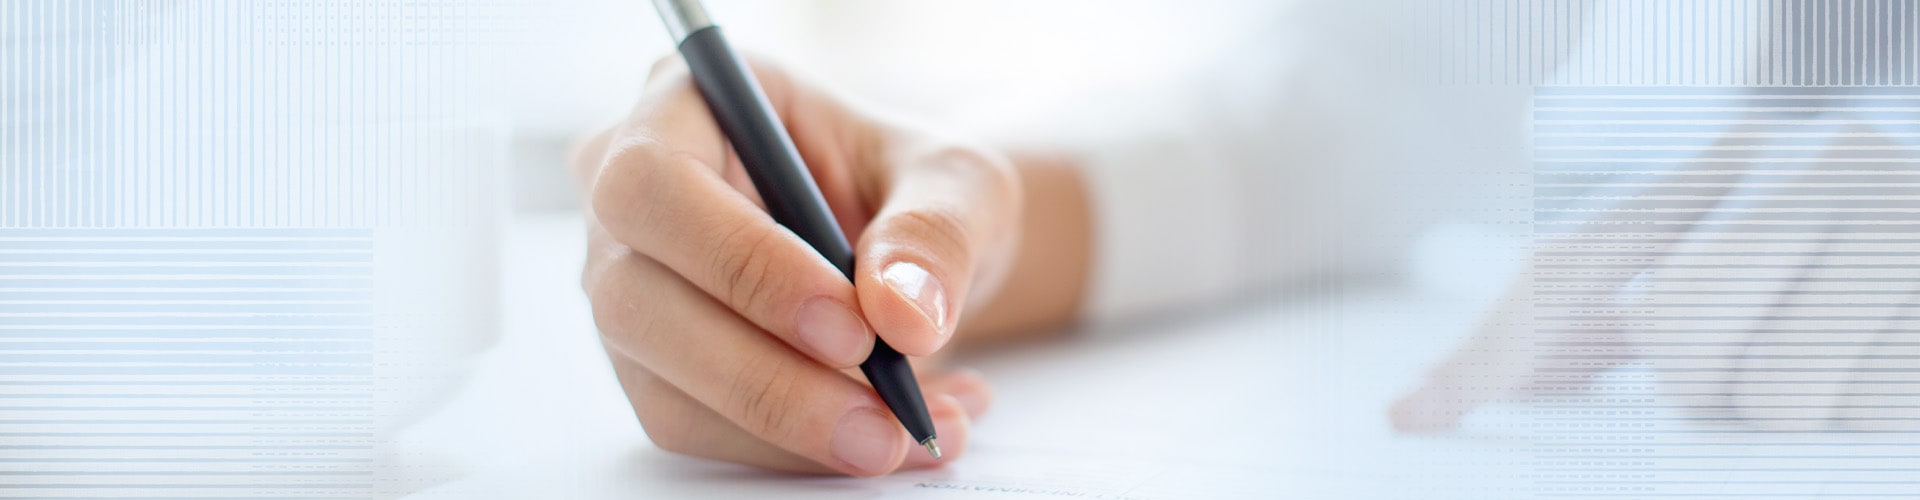 a person's hand writing a document